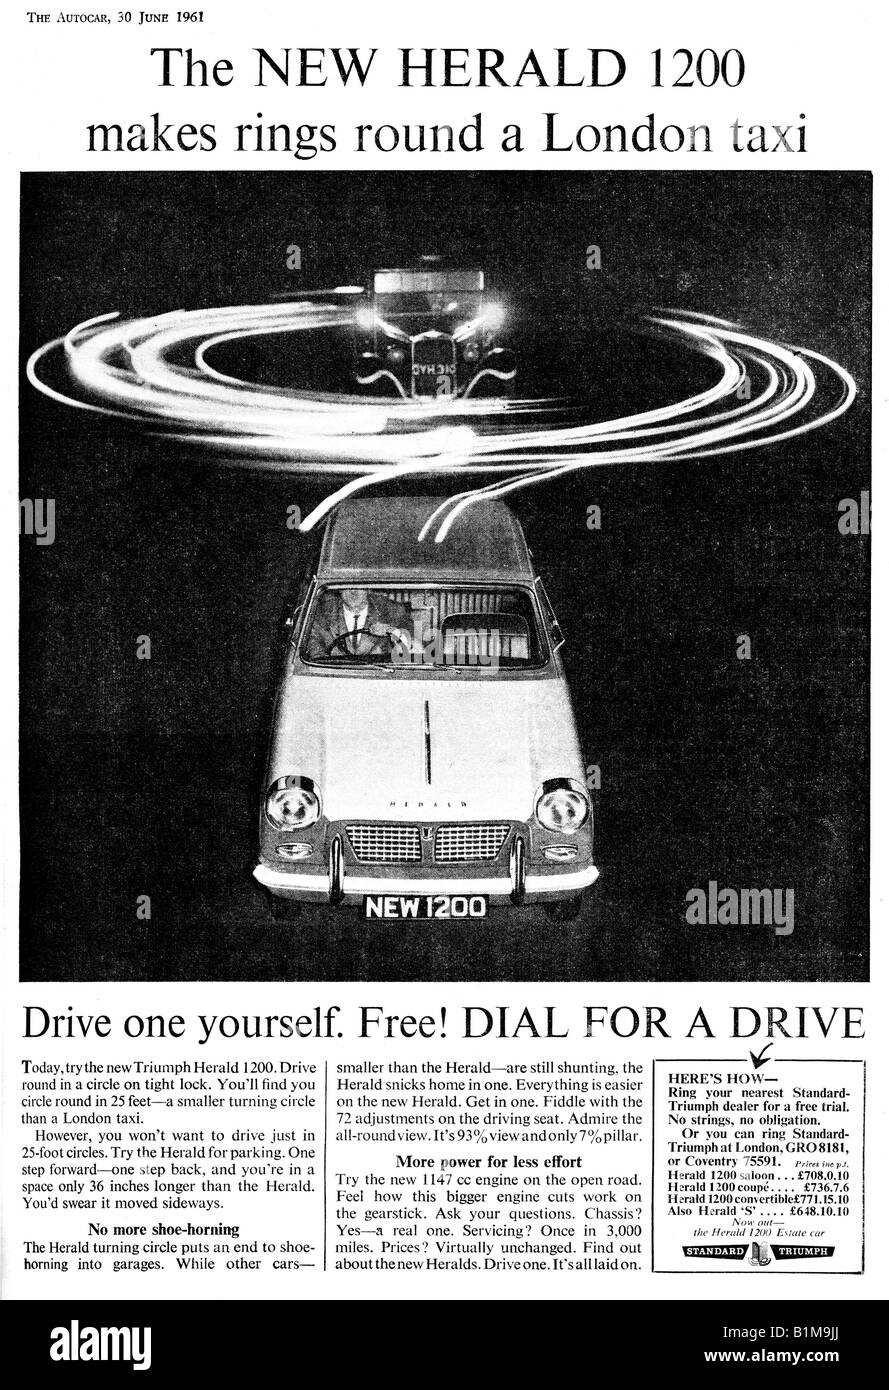 1961 UK Magazine Advertisement for the Triumph Herald 1200 Motor Car from Standard Triumph FOR EDITORIAL USE ONLY Stock Photo